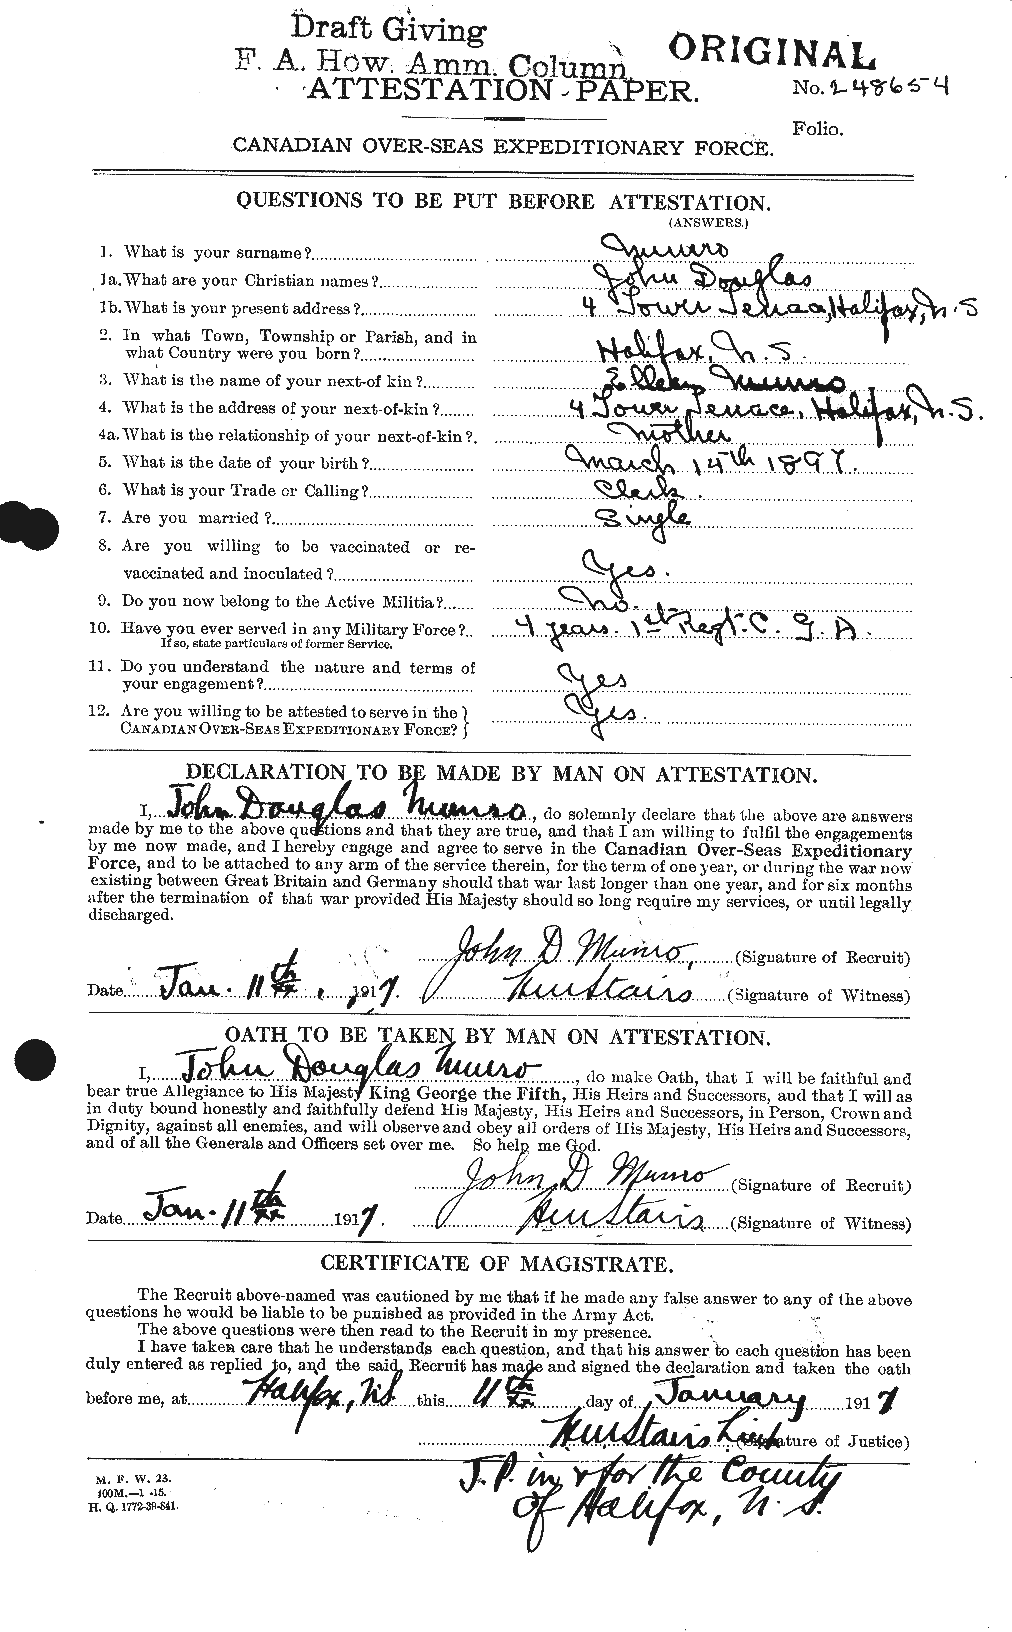 Personnel Records of the First World War - CEF 513956a